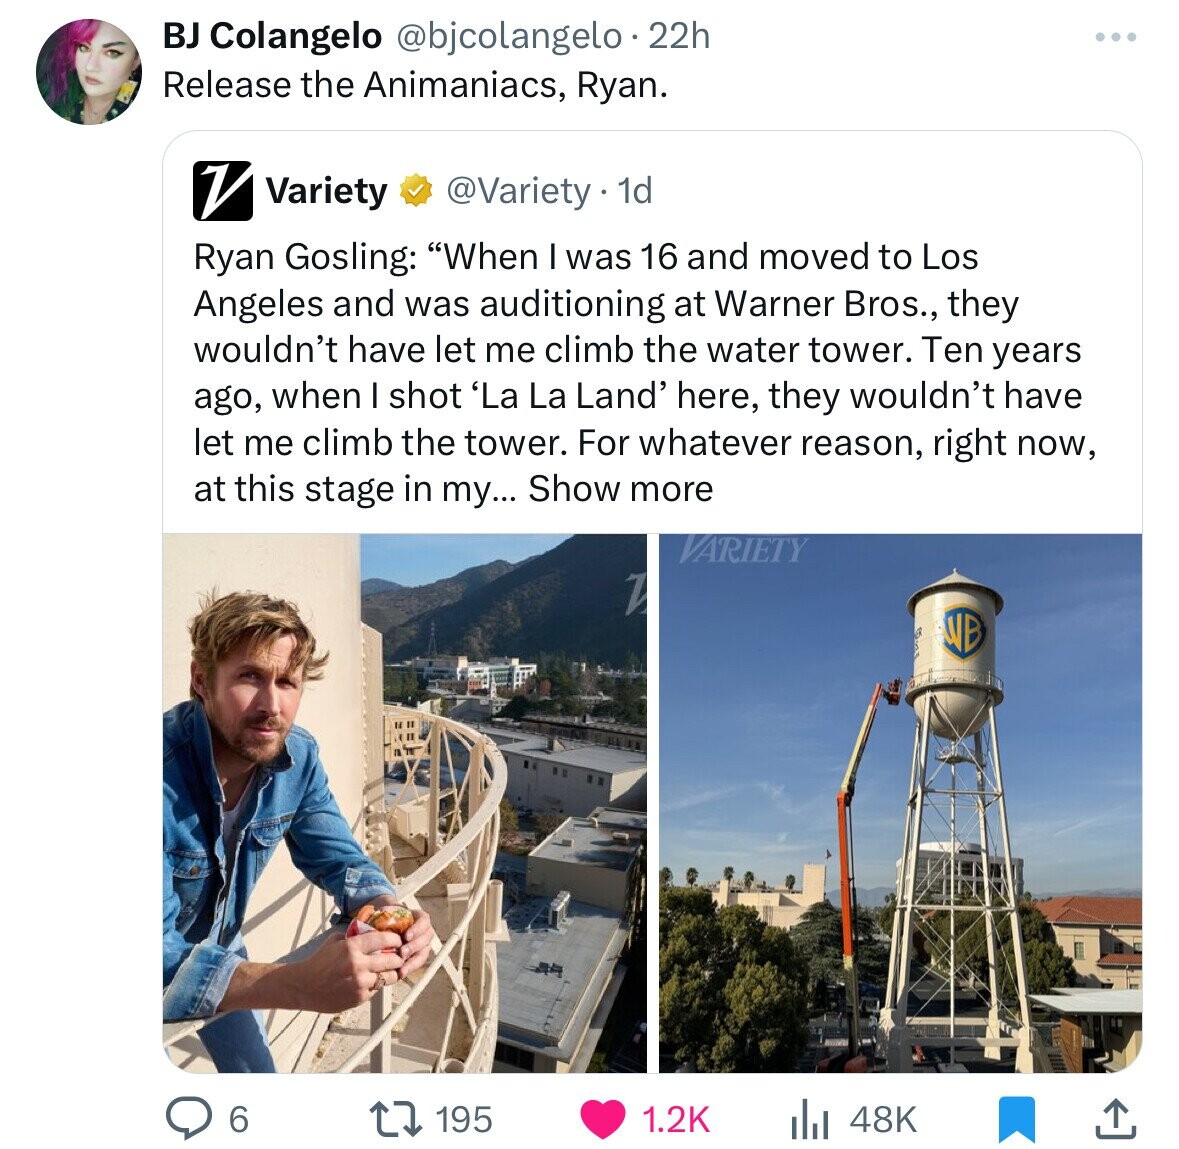 presentation - Bj Colangelo 22h Release the Animaniacs, Ryan. Variety . 1d Ryan Gosling "When I was 16 and moved to Los Angeles and was auditioning at Warner Bros., they wouldn't have let me climb the water tower. Ten years ago, when I shot 'La La Land' h